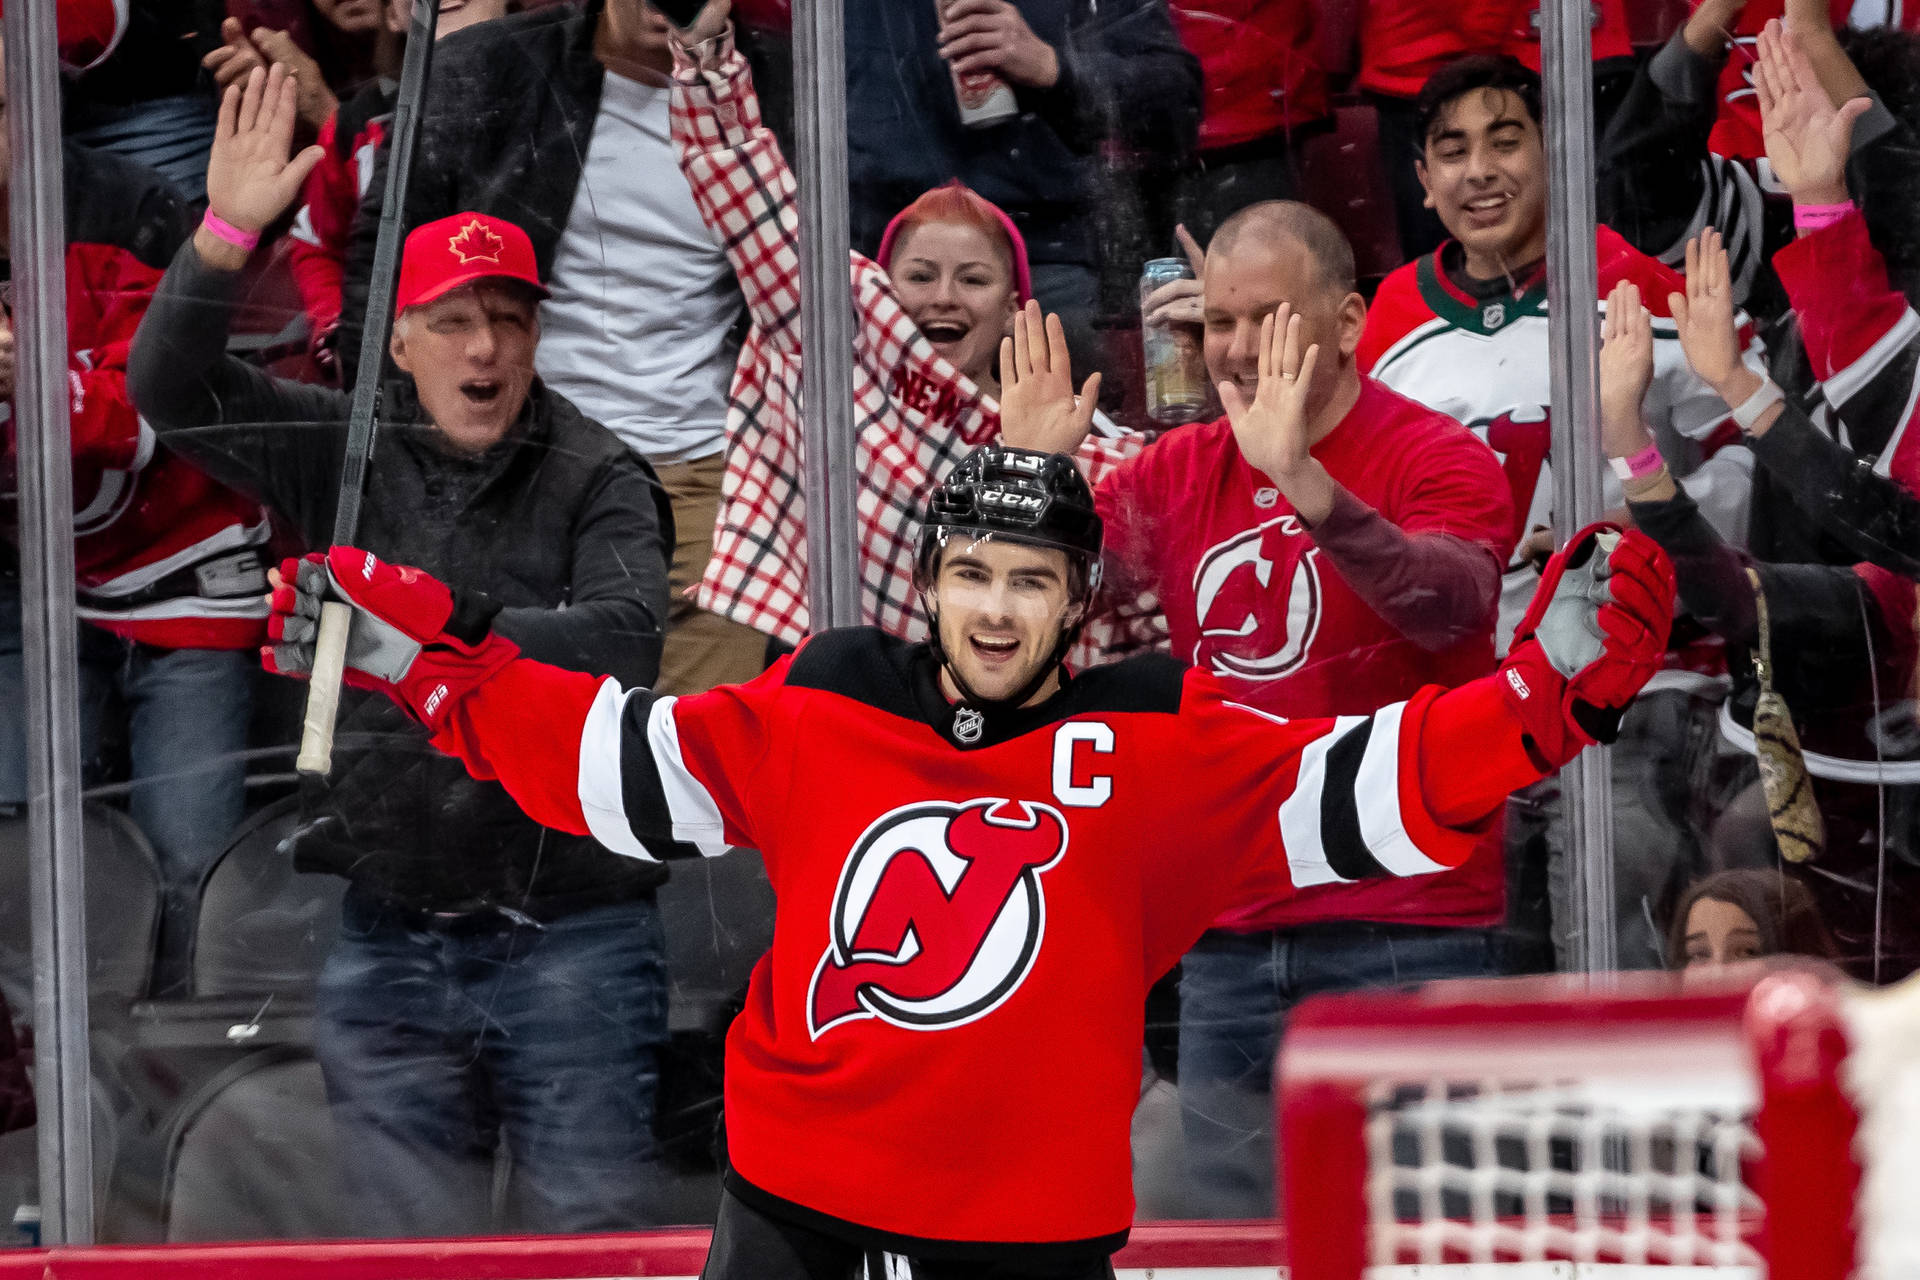 Exciting Moments With Nj Devils Player Background